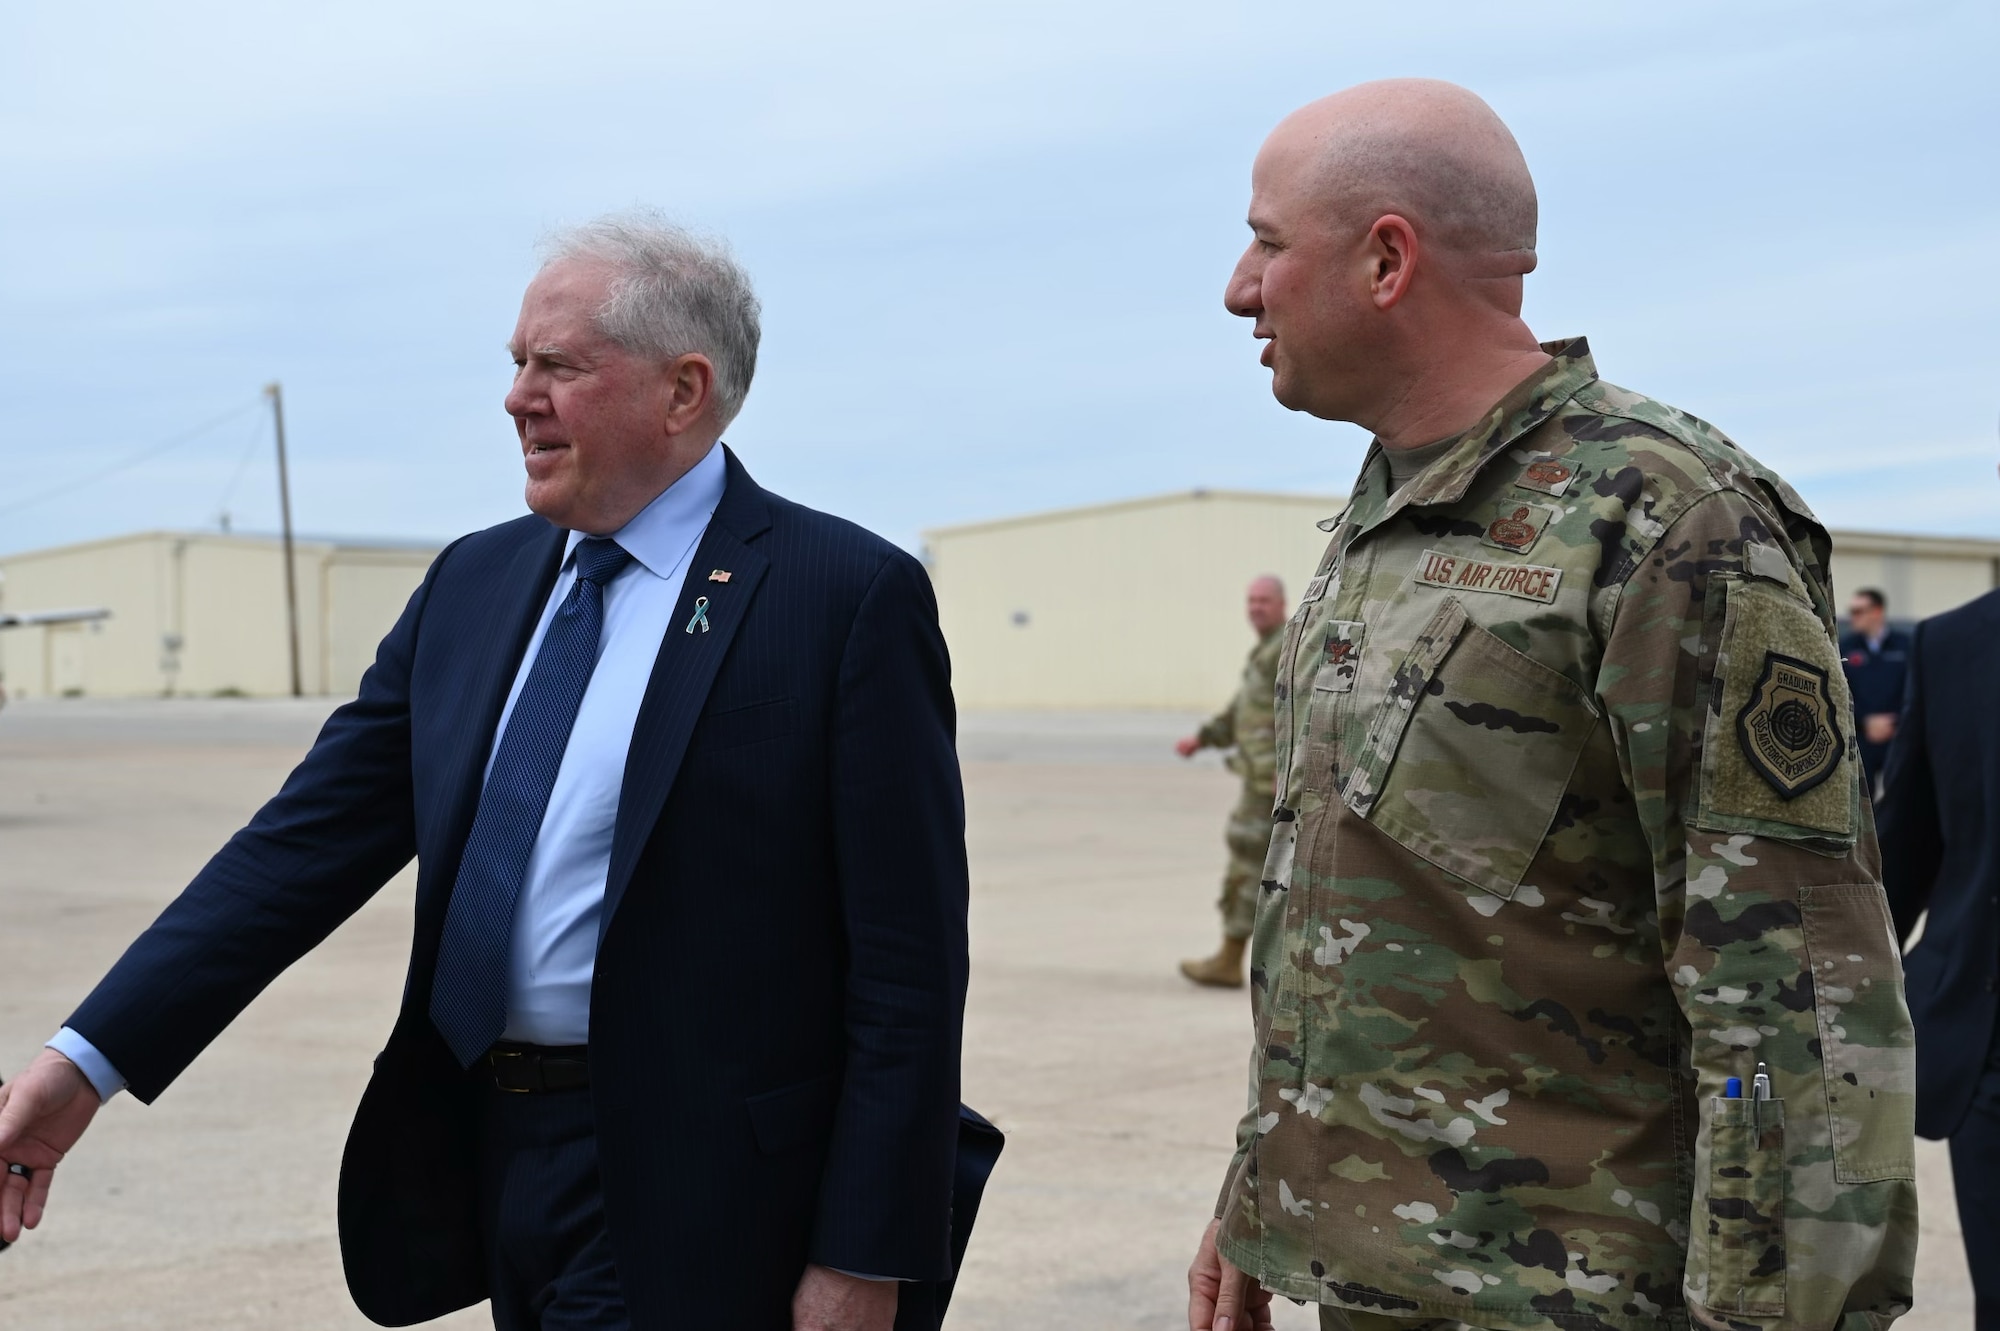 Secretary of the Air Force Frank Kendall lands in San Angelo, Texas, during a visit to Goodfellow Air Force Base, April 4, 2023. Kendall visited Goodfellow to observe base operations and meet with joint service members assigned to the 17th Training Wing (U.S. Air Force photo by Airman 1st Class Zach Heimbuch)